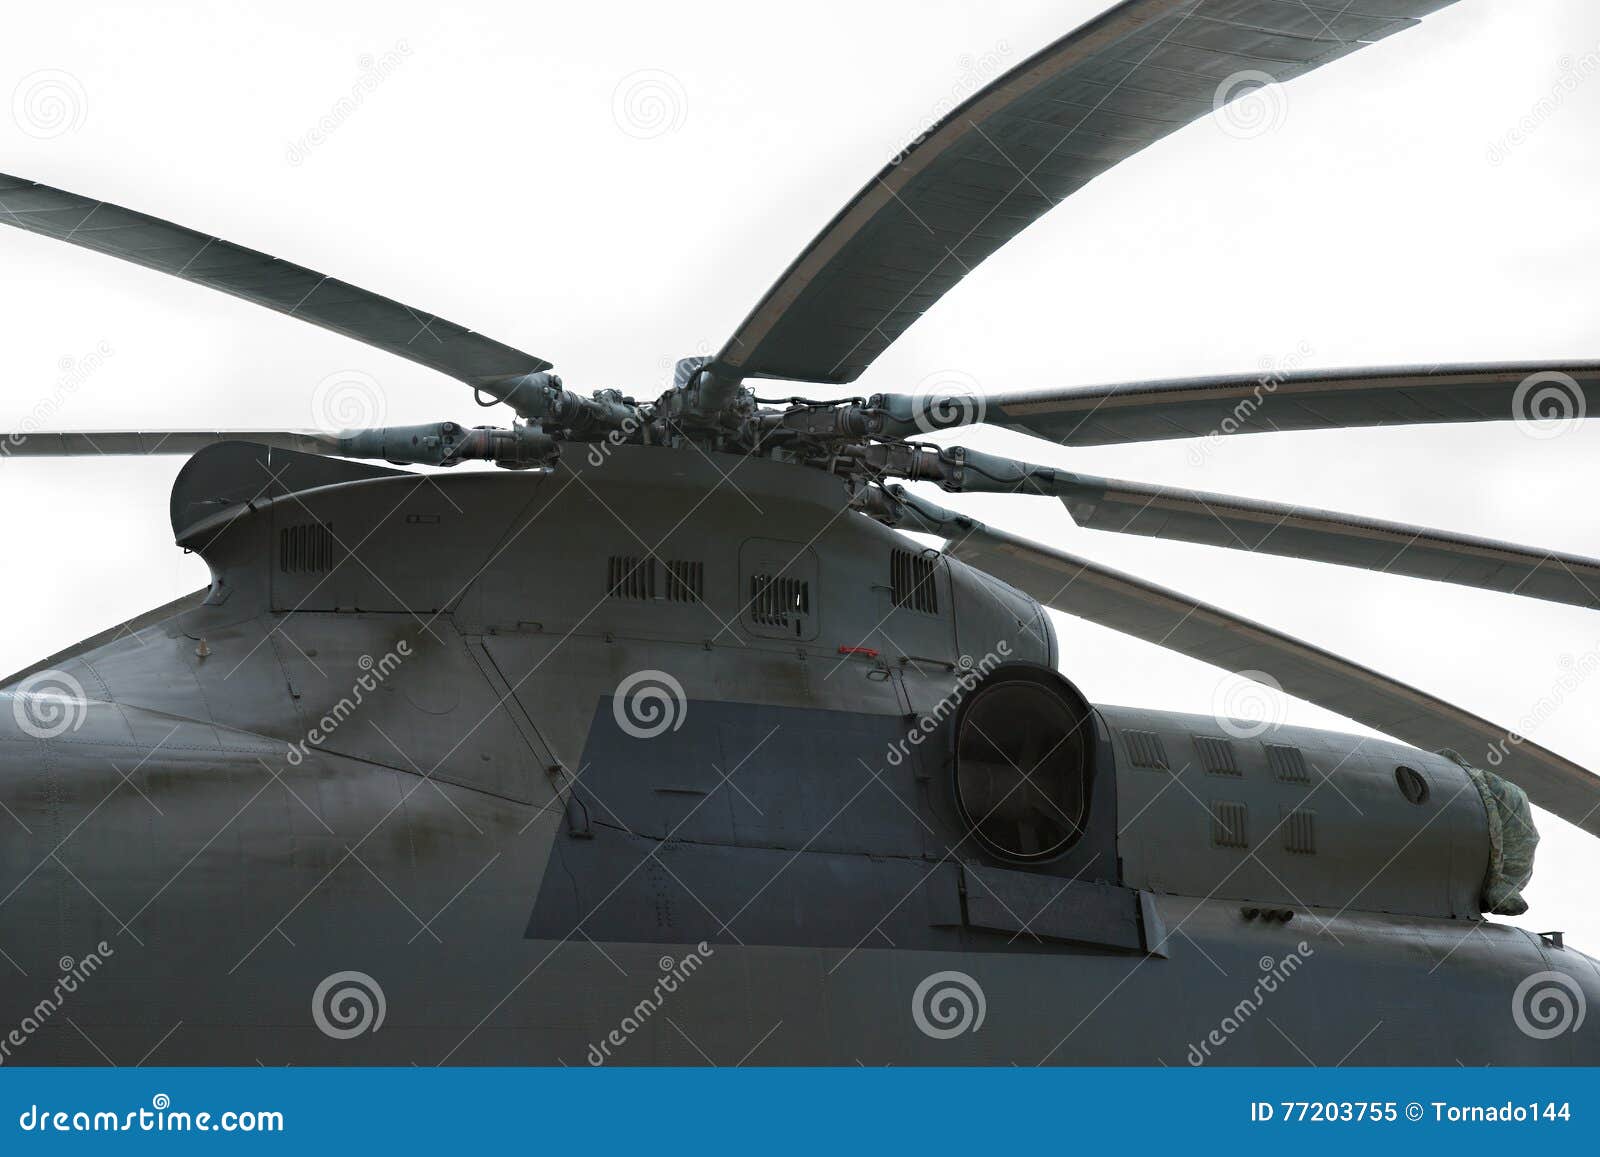 Engine and main rotor of a heavy helicopter. Engine and main rotor of a modern heavy helicopter isolated against white background.